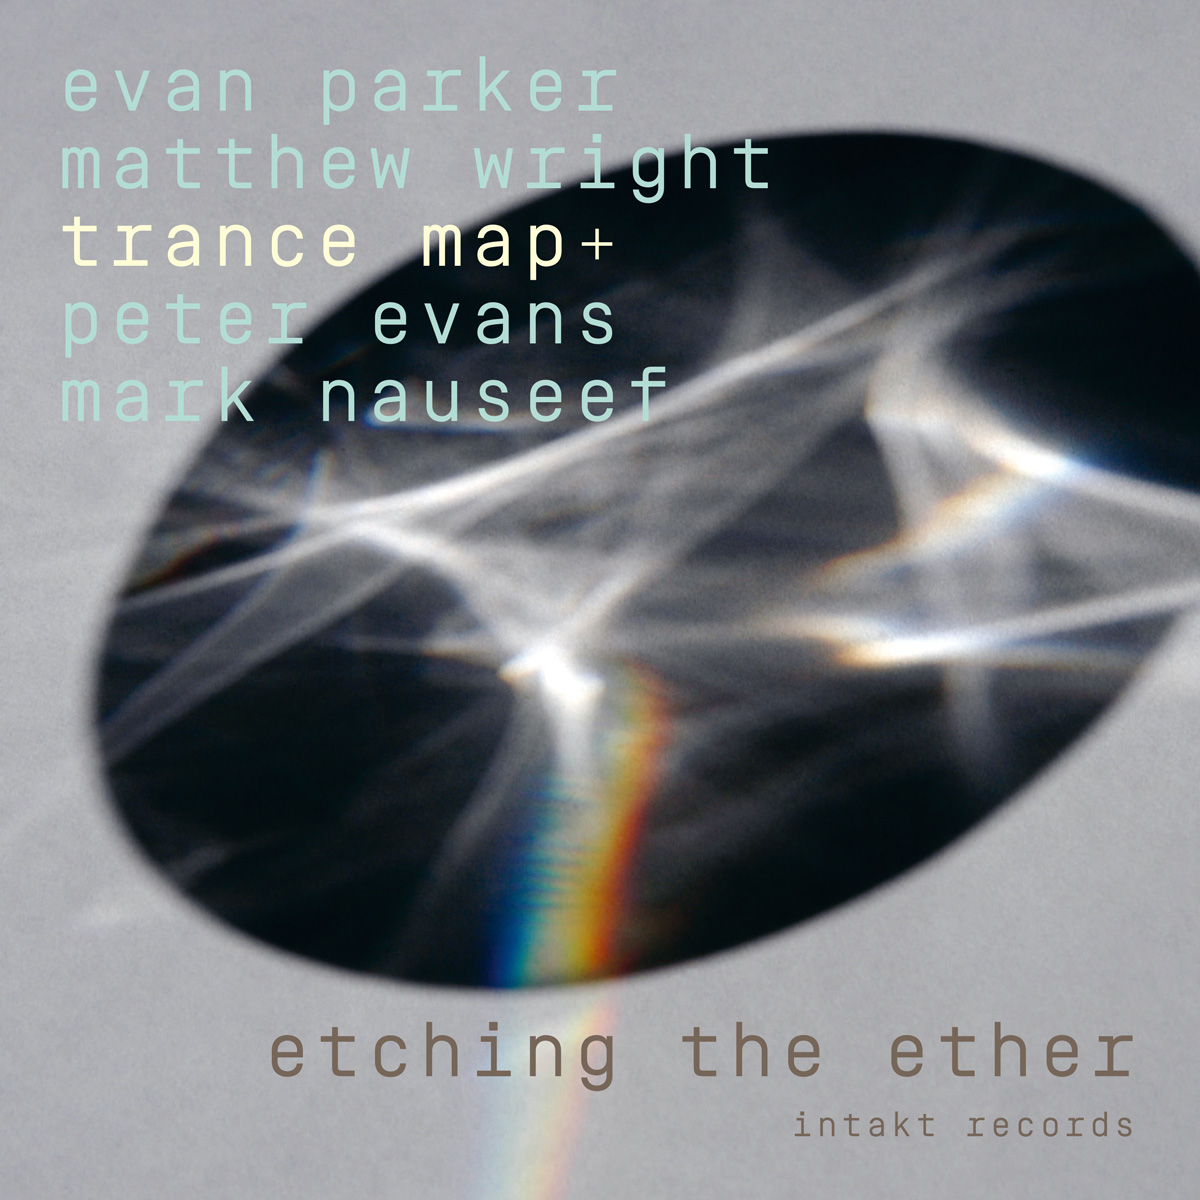 EVAN PARKER MATTHEW WRIGHT TRANCE MAP+
PETER EVANS AND MARK NAUSEEF
ETCHING THE ETHER cover front intakt records